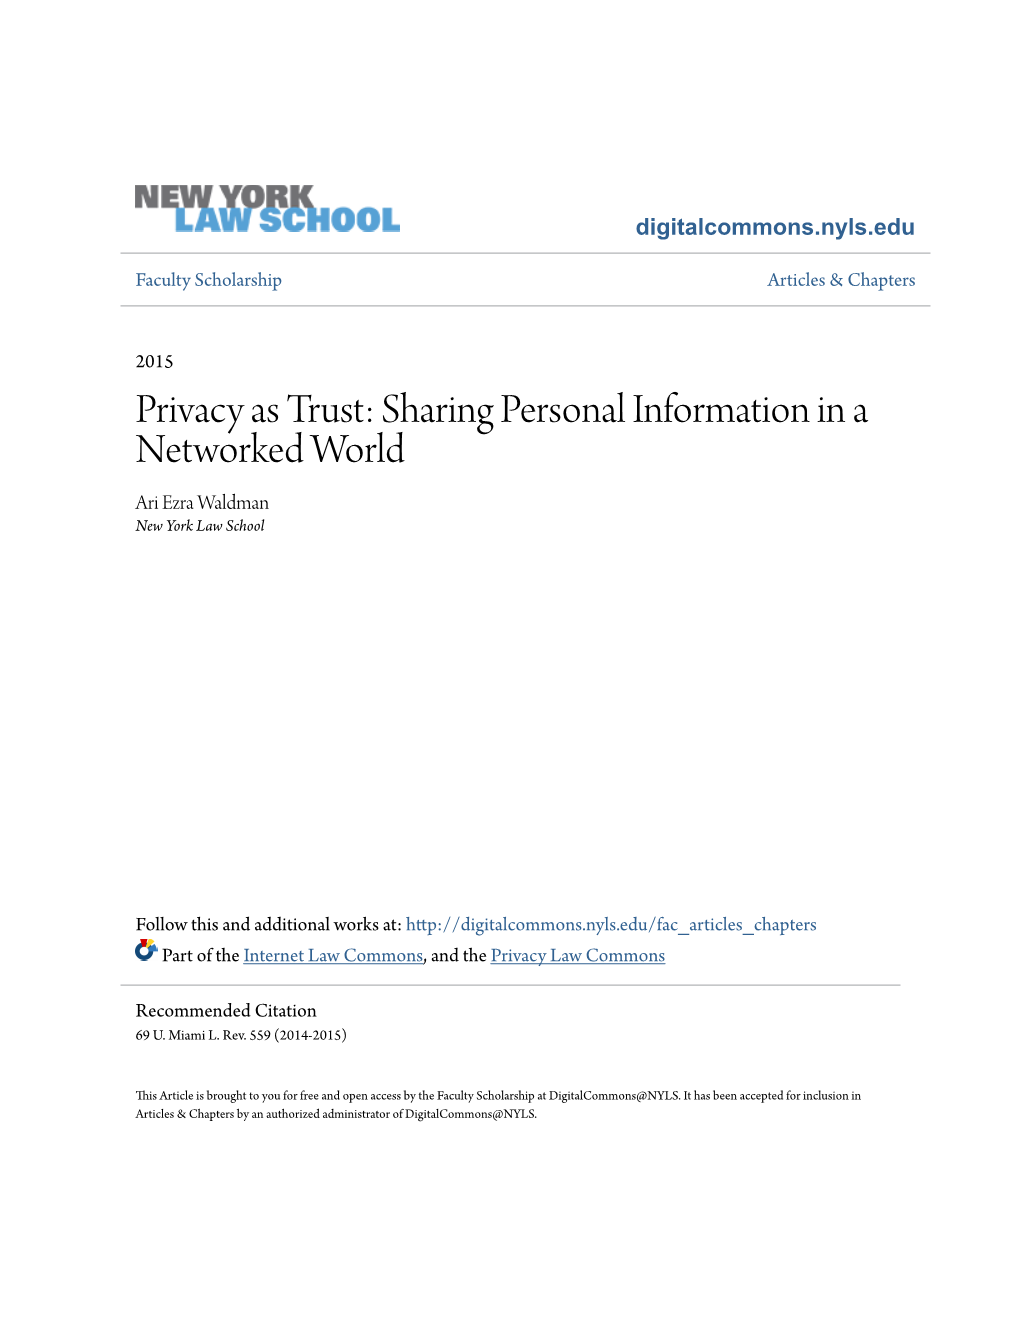 Privacy As Trust: Sharing Personal Information in a Networked World Ari Ezra Waldman New York Law School